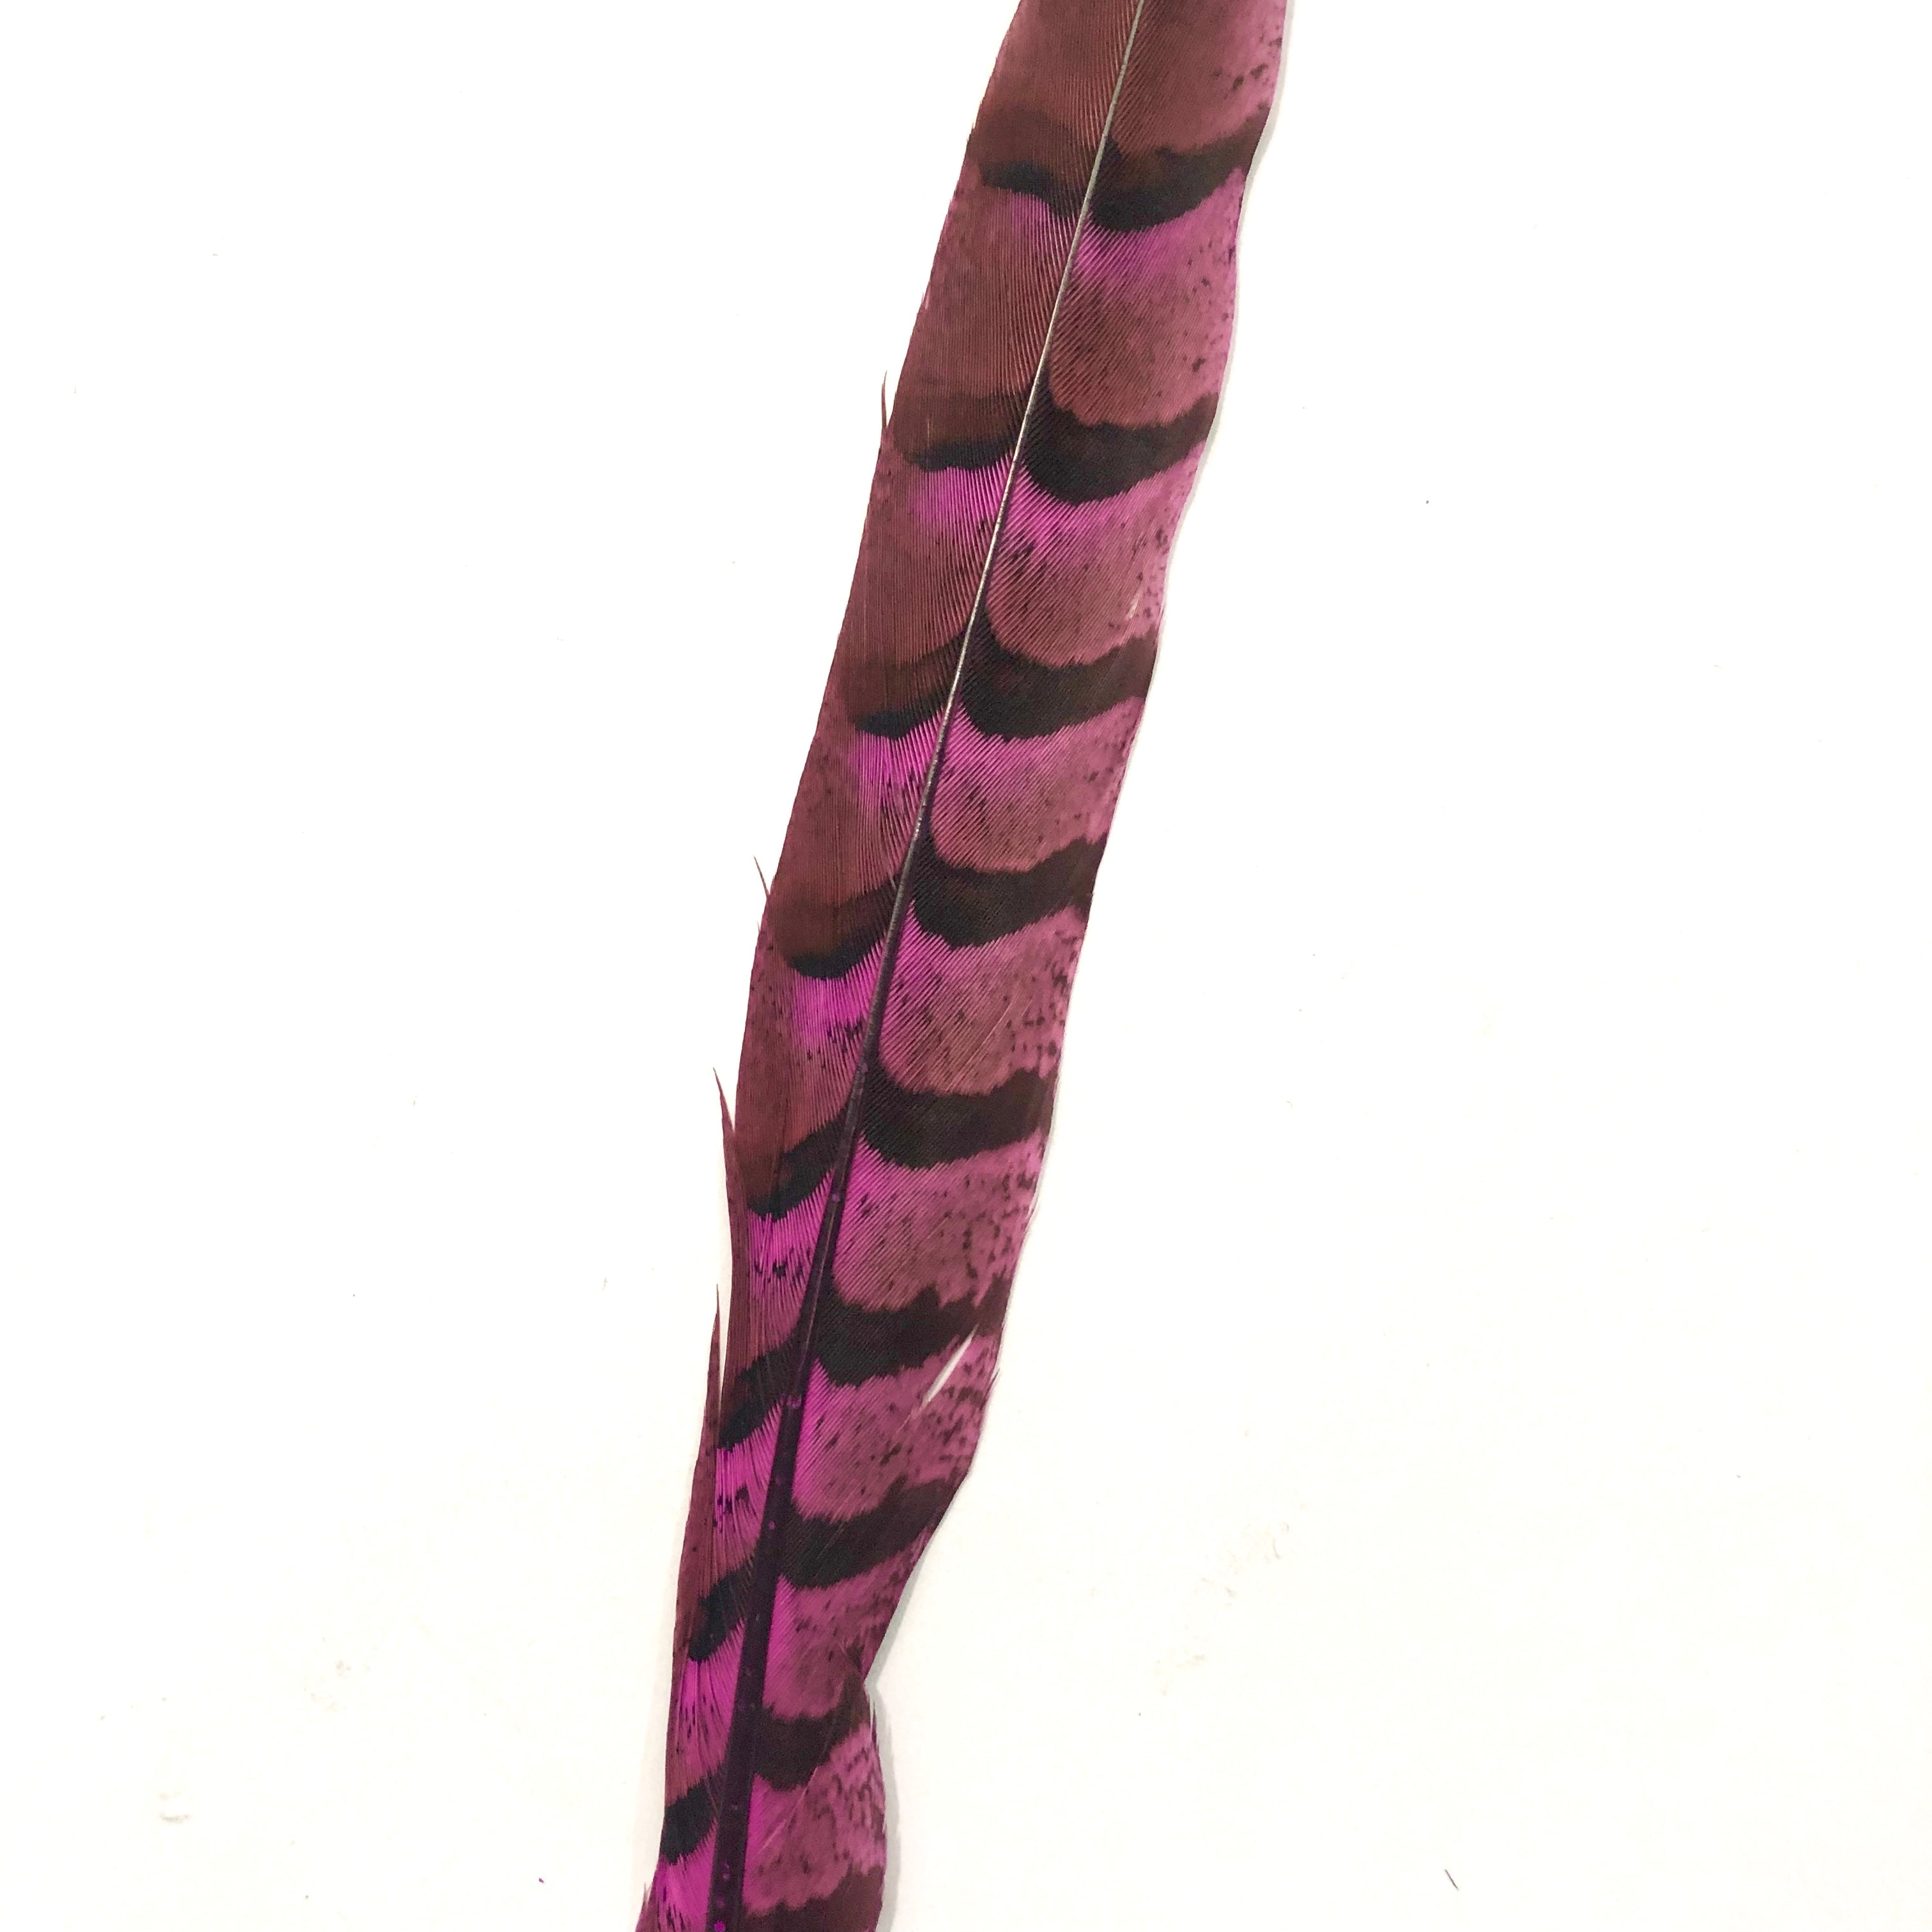 12" to 14" Reeves Pheasant Tail Feather - Hot Pink